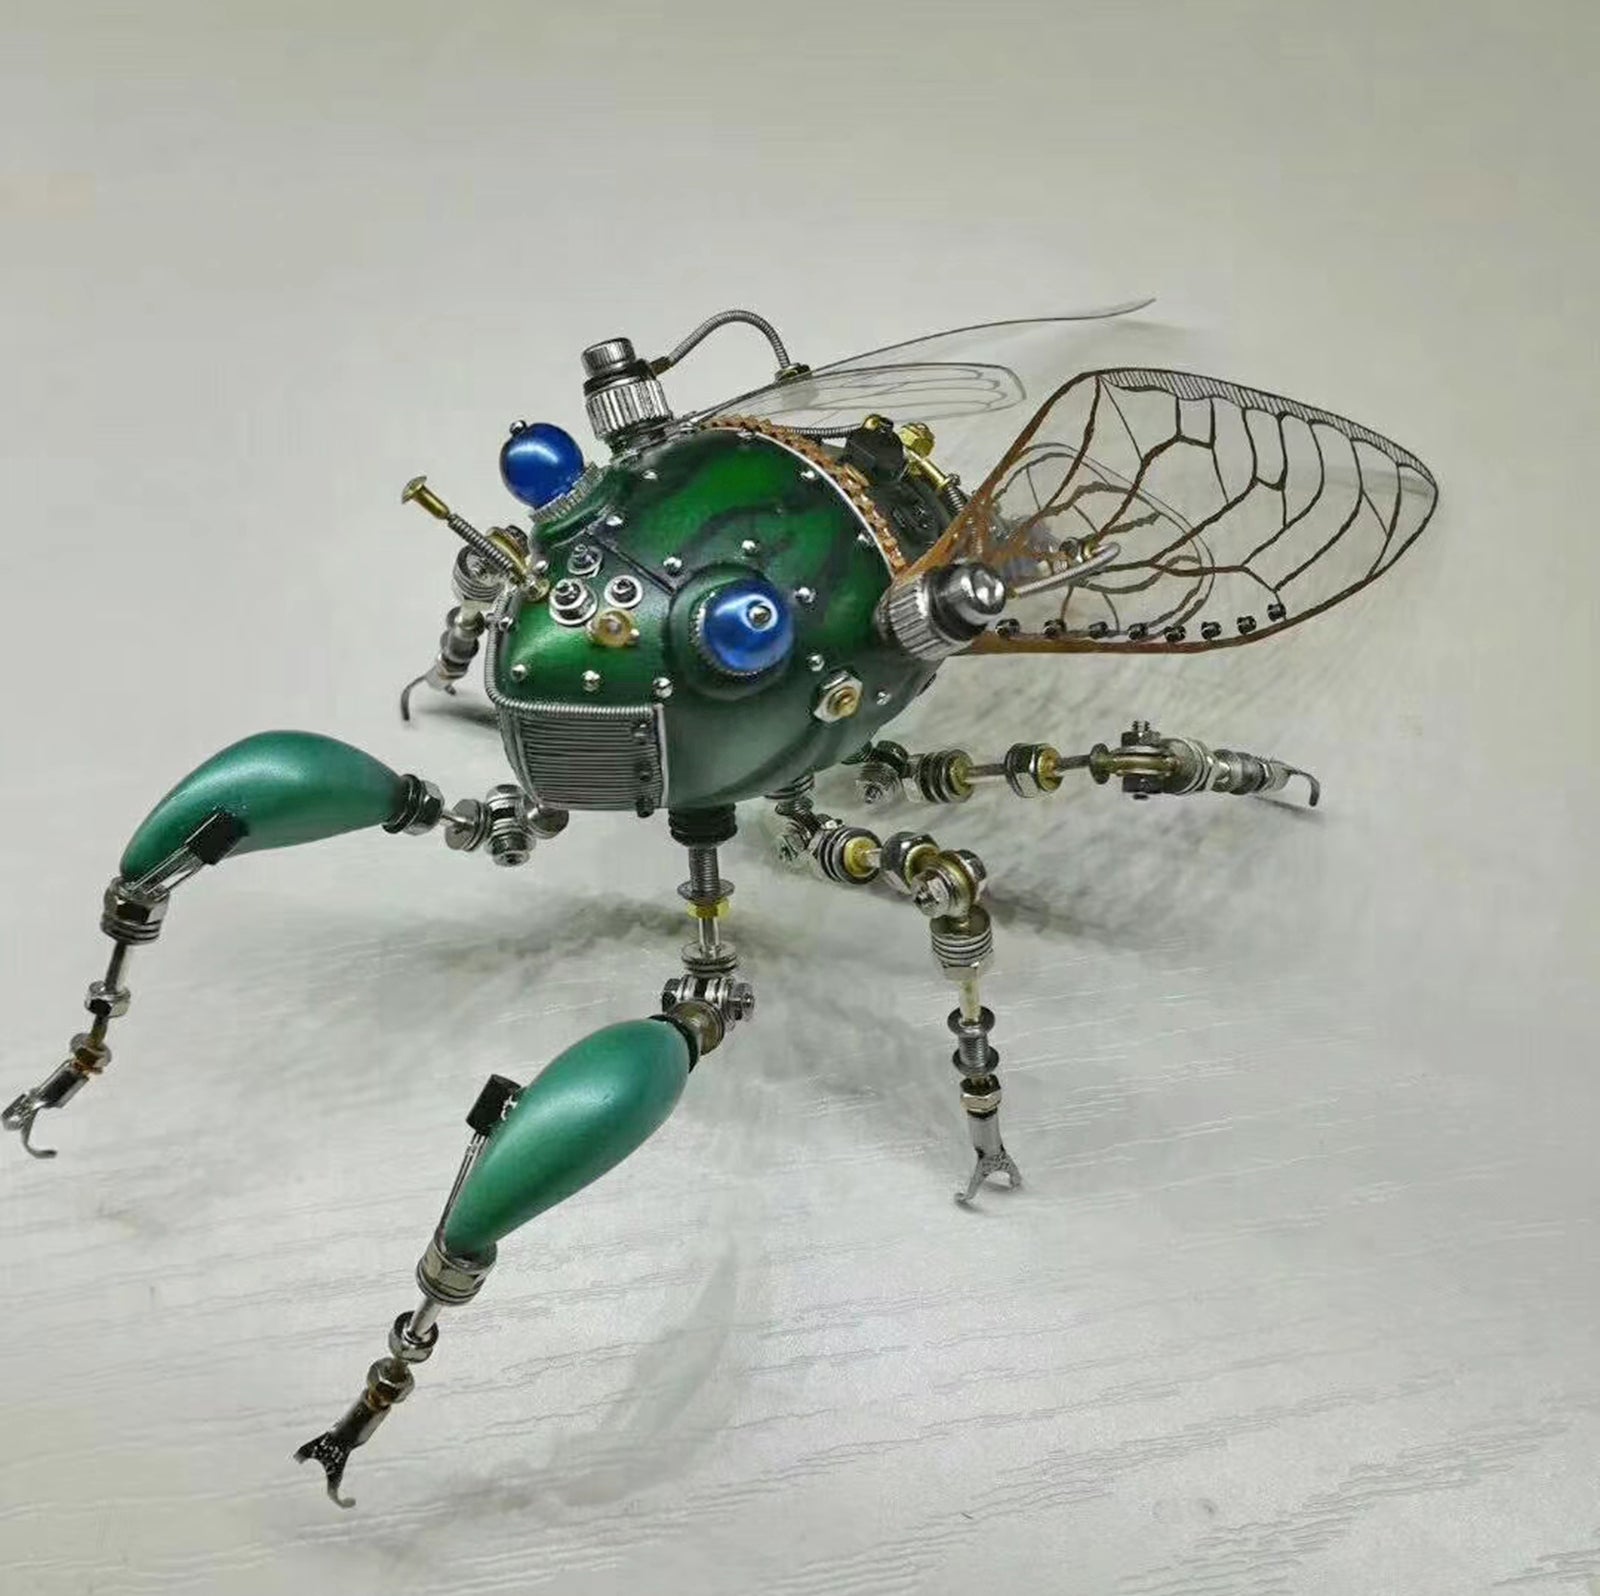 Steampunk Green Leafhopper Cicada Bug 3D Metal  Assembly Model KitsPuzzle Crafts Collection